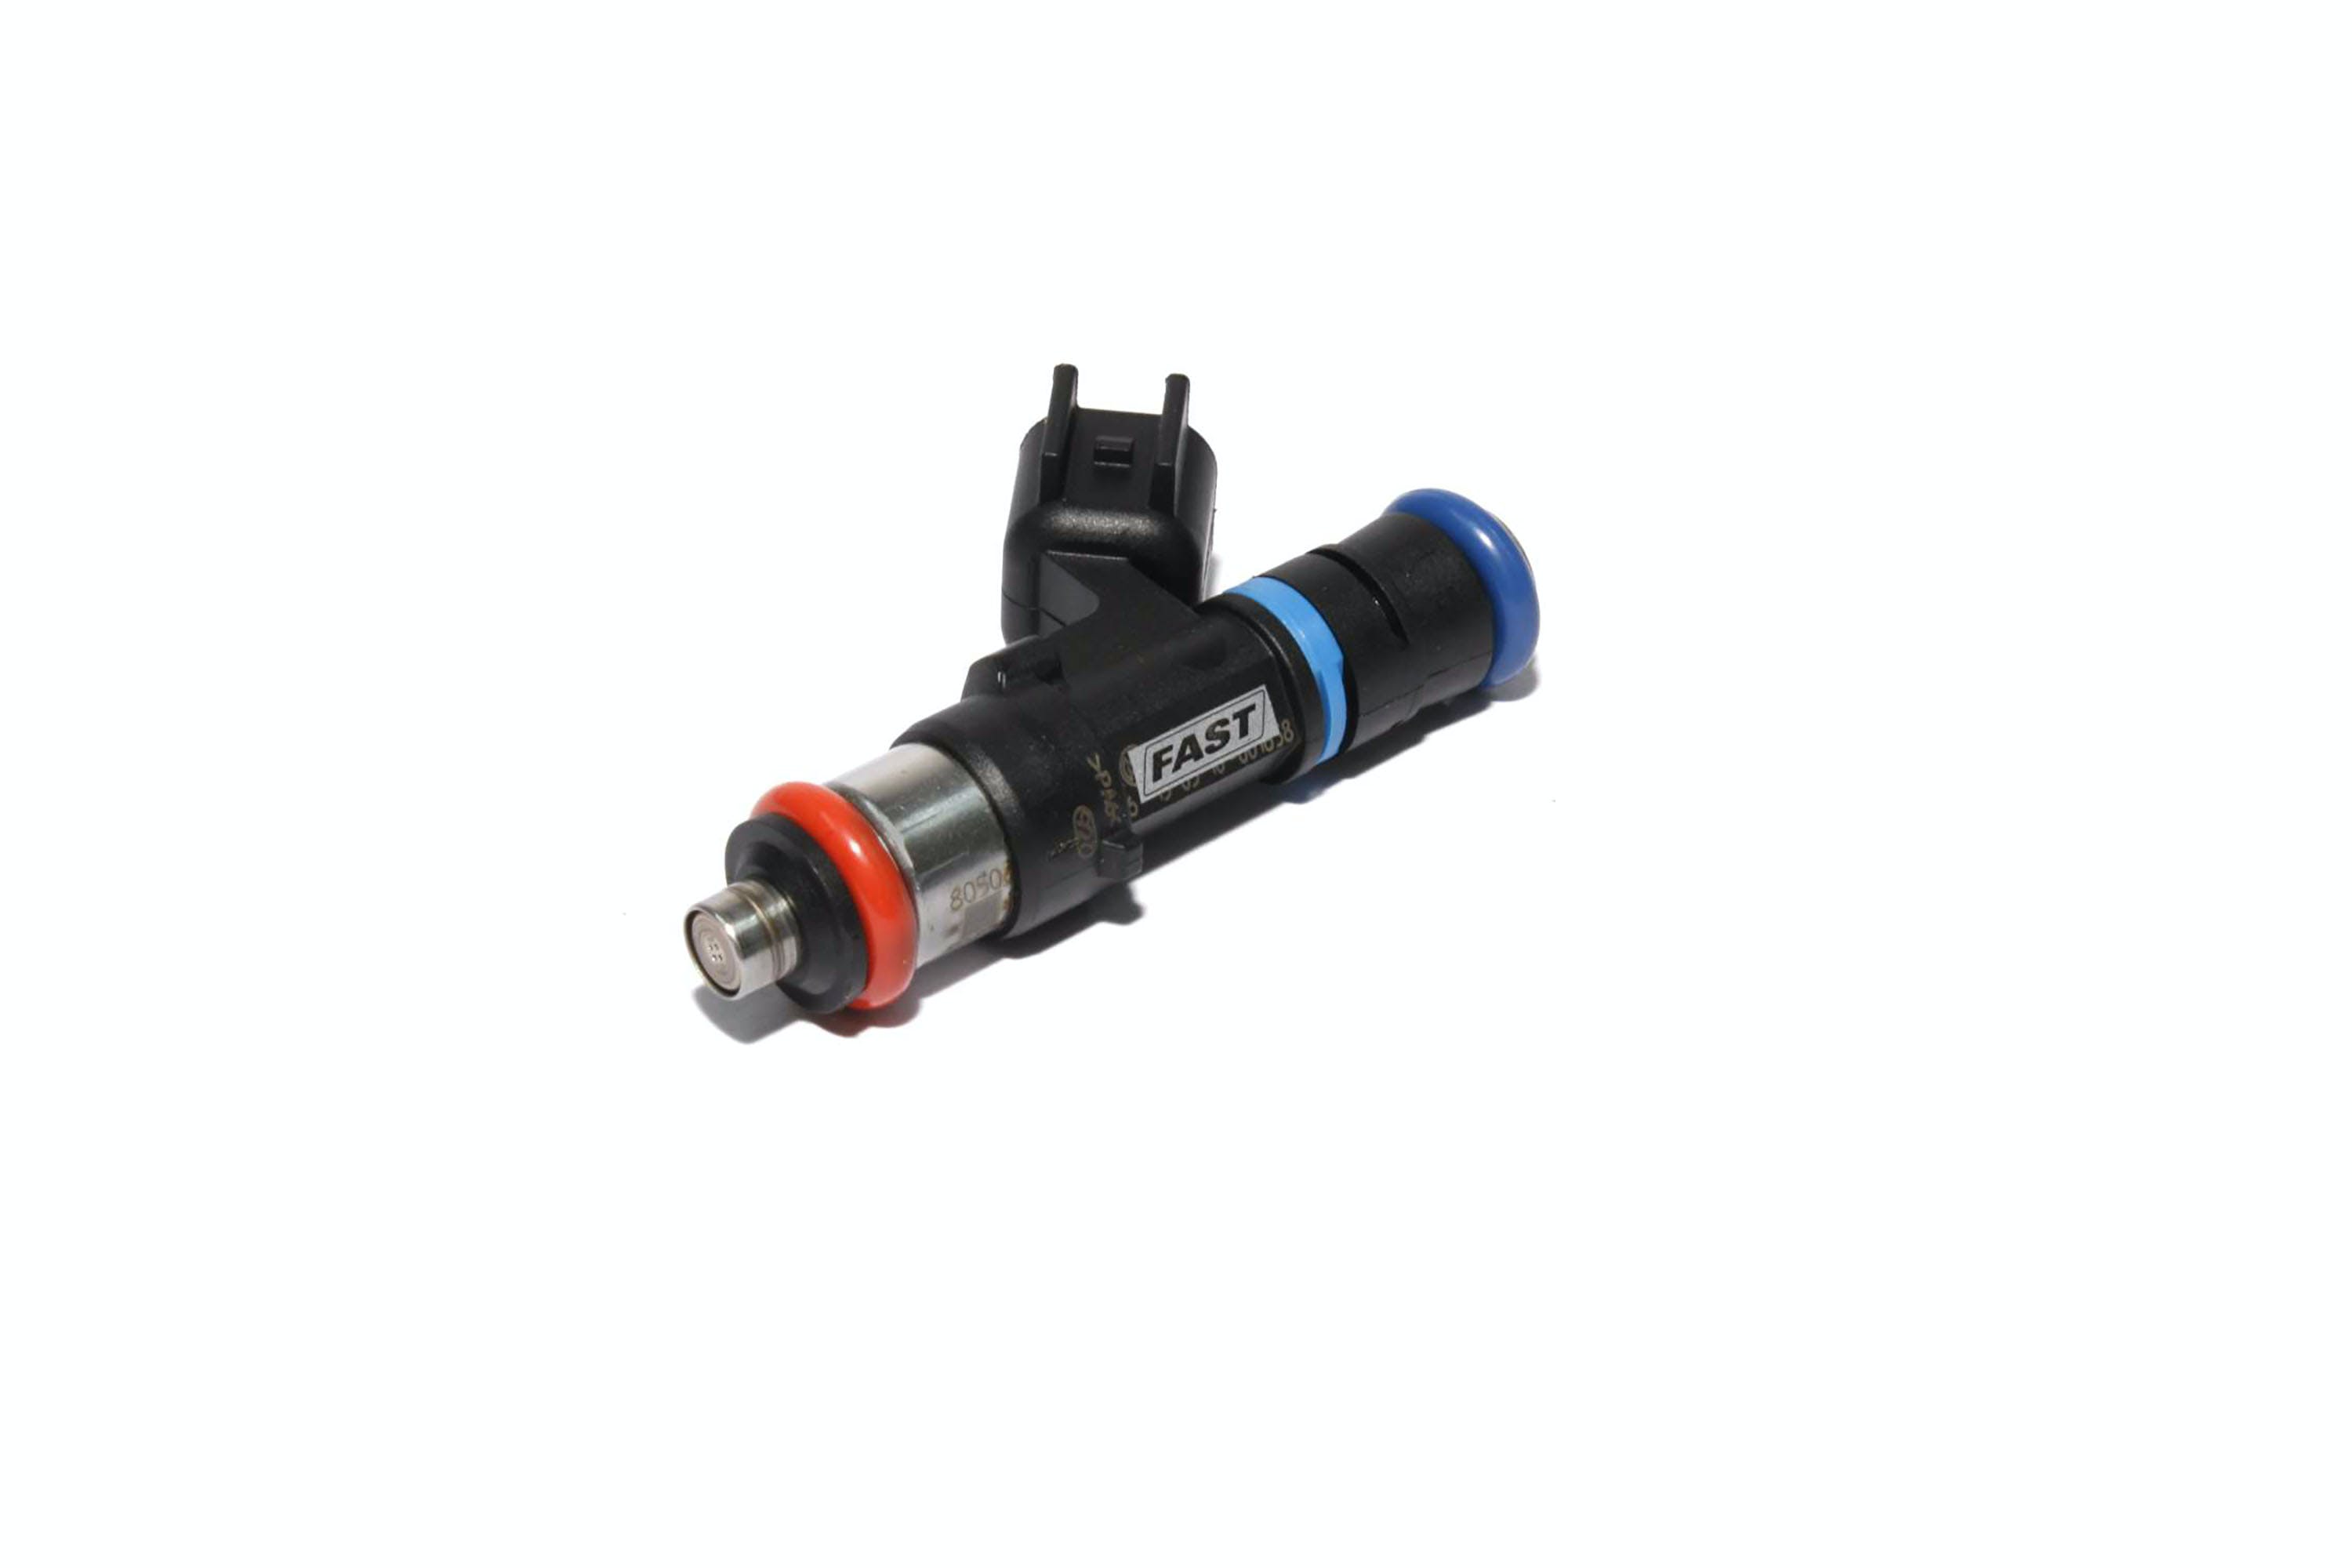 FAST - Fuel Air Spark Technology 30462-1 FAST LS2 Type 46 Lb/Hr High Impedance Injector